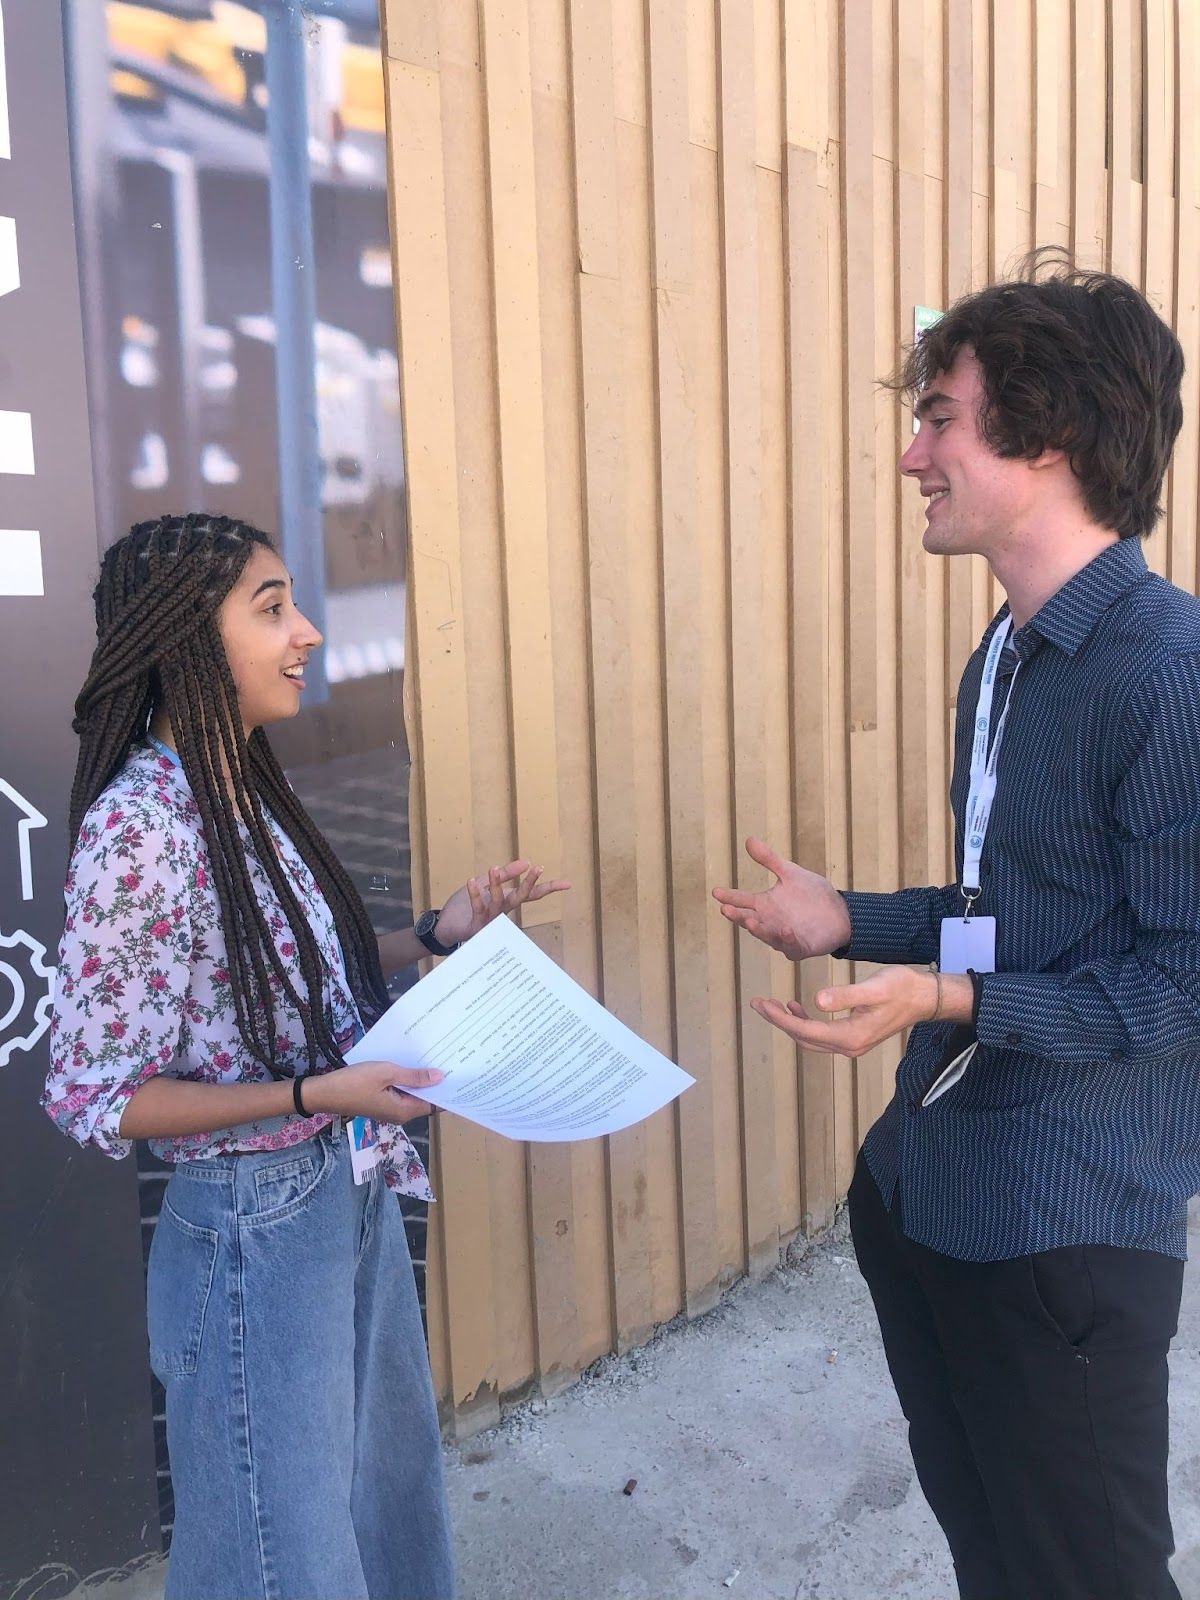 Tom Hobday is a junior at the College of St. Benedict and St. John’s University (originally from St. Paul, Minn.) with a major in environmental studies. Here he is interviewing Larissa Pinto Moraes, an activist associated with Engajamundo Brazil, in November 2022 at the U.N. Climate Change Conference in Sharm el-Sheikh, Egypt. (Courtesy of Tom Hobday)